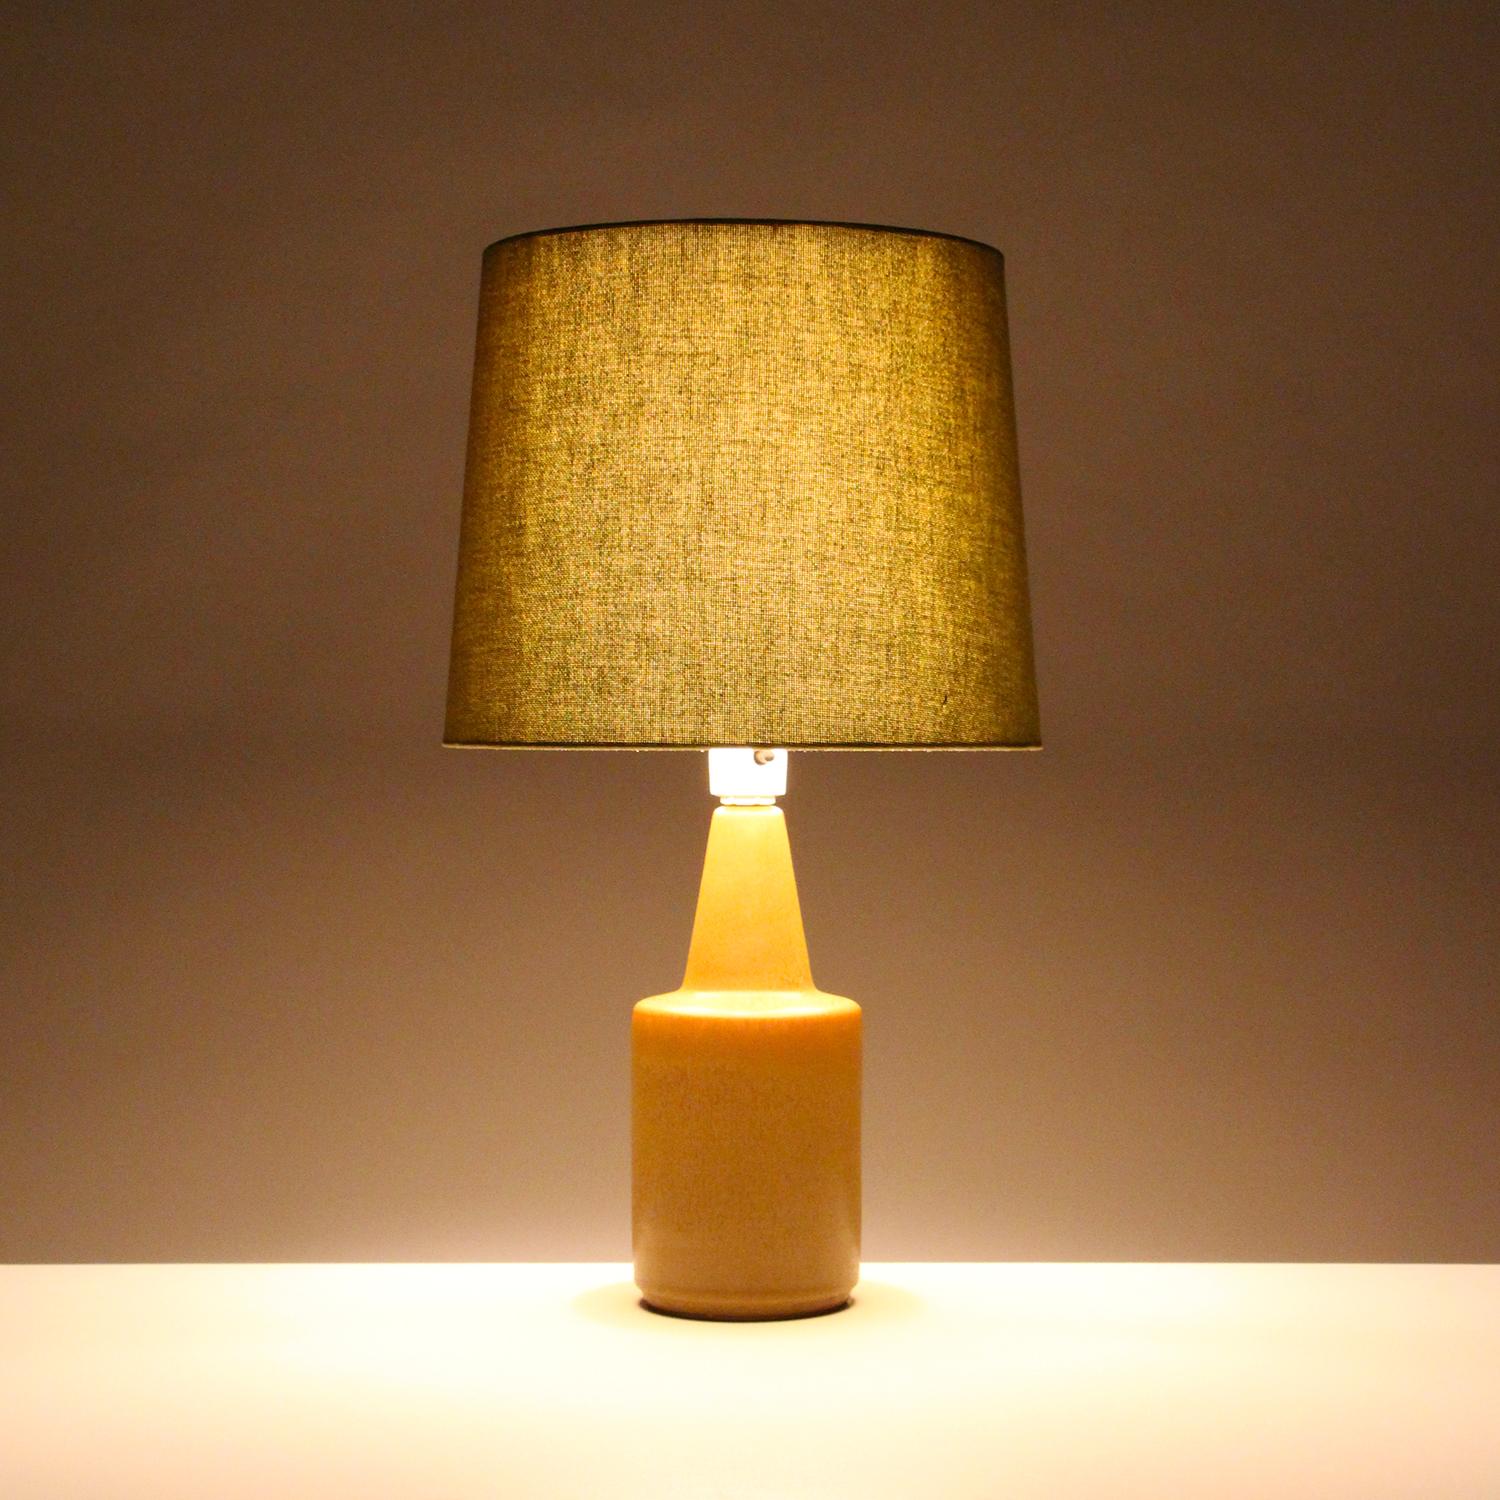 Ceramic table lamp by Einar Johansen for Søholm in the 1960s, Danish hare's fur glaze lamp stand with vintage fabric shade included, in excellent vintage condition.

A beautiful ceramic table lamp with a cylindrical base and short narrowing neck,